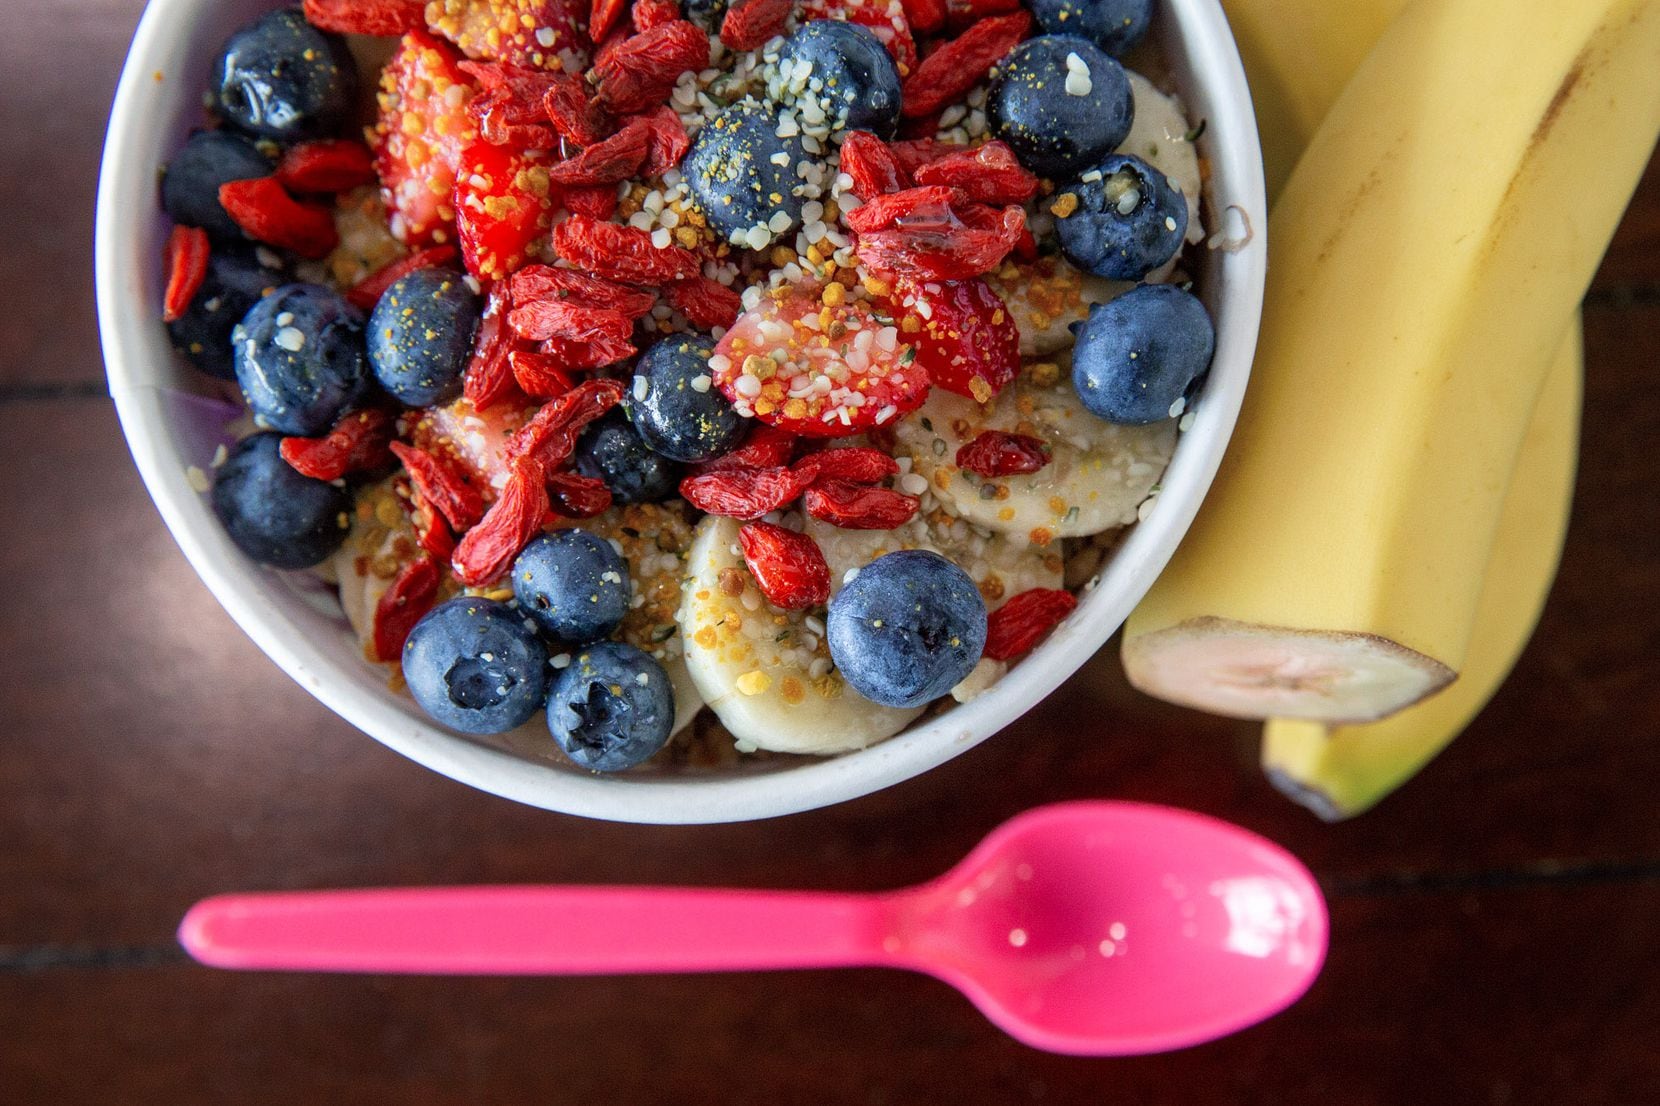 Bee pollen is commonly found on acai bowls and in smoothies.